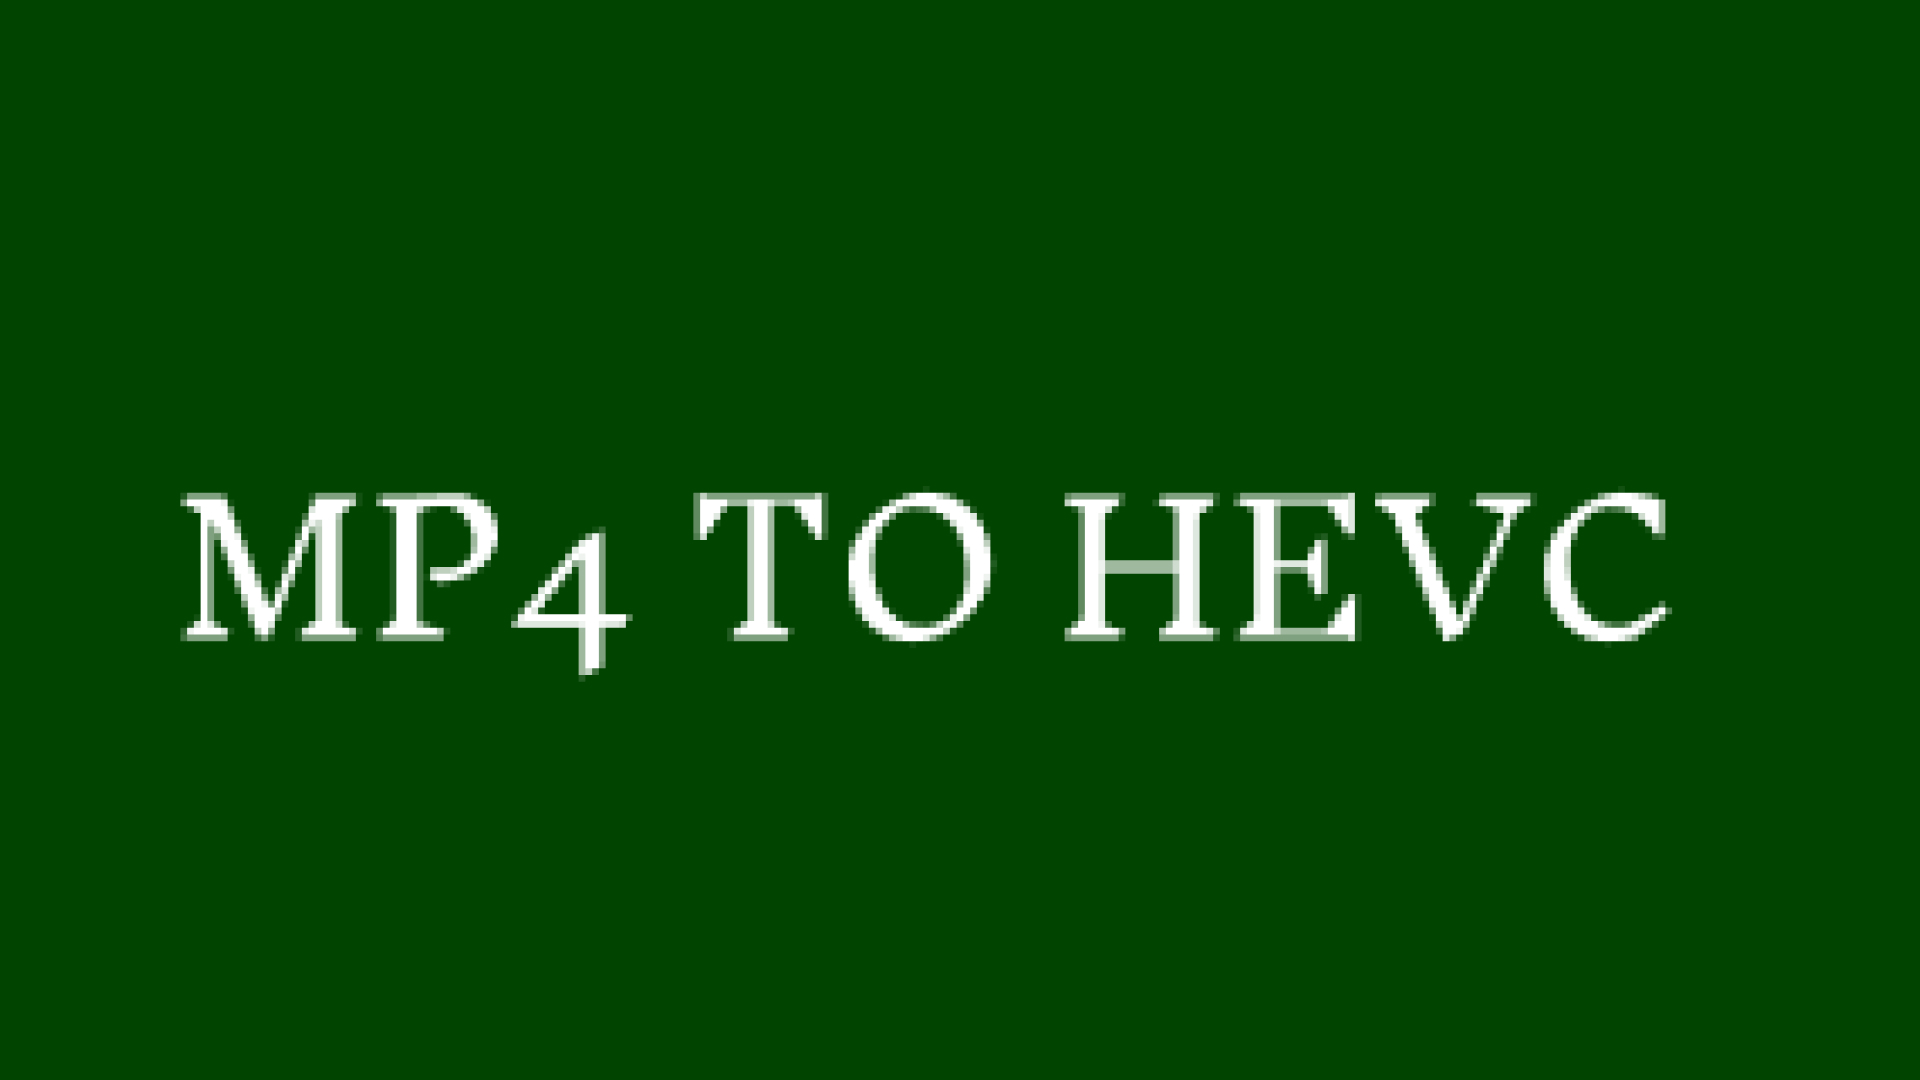 How to Convert MP4 to HEVC Quickly?